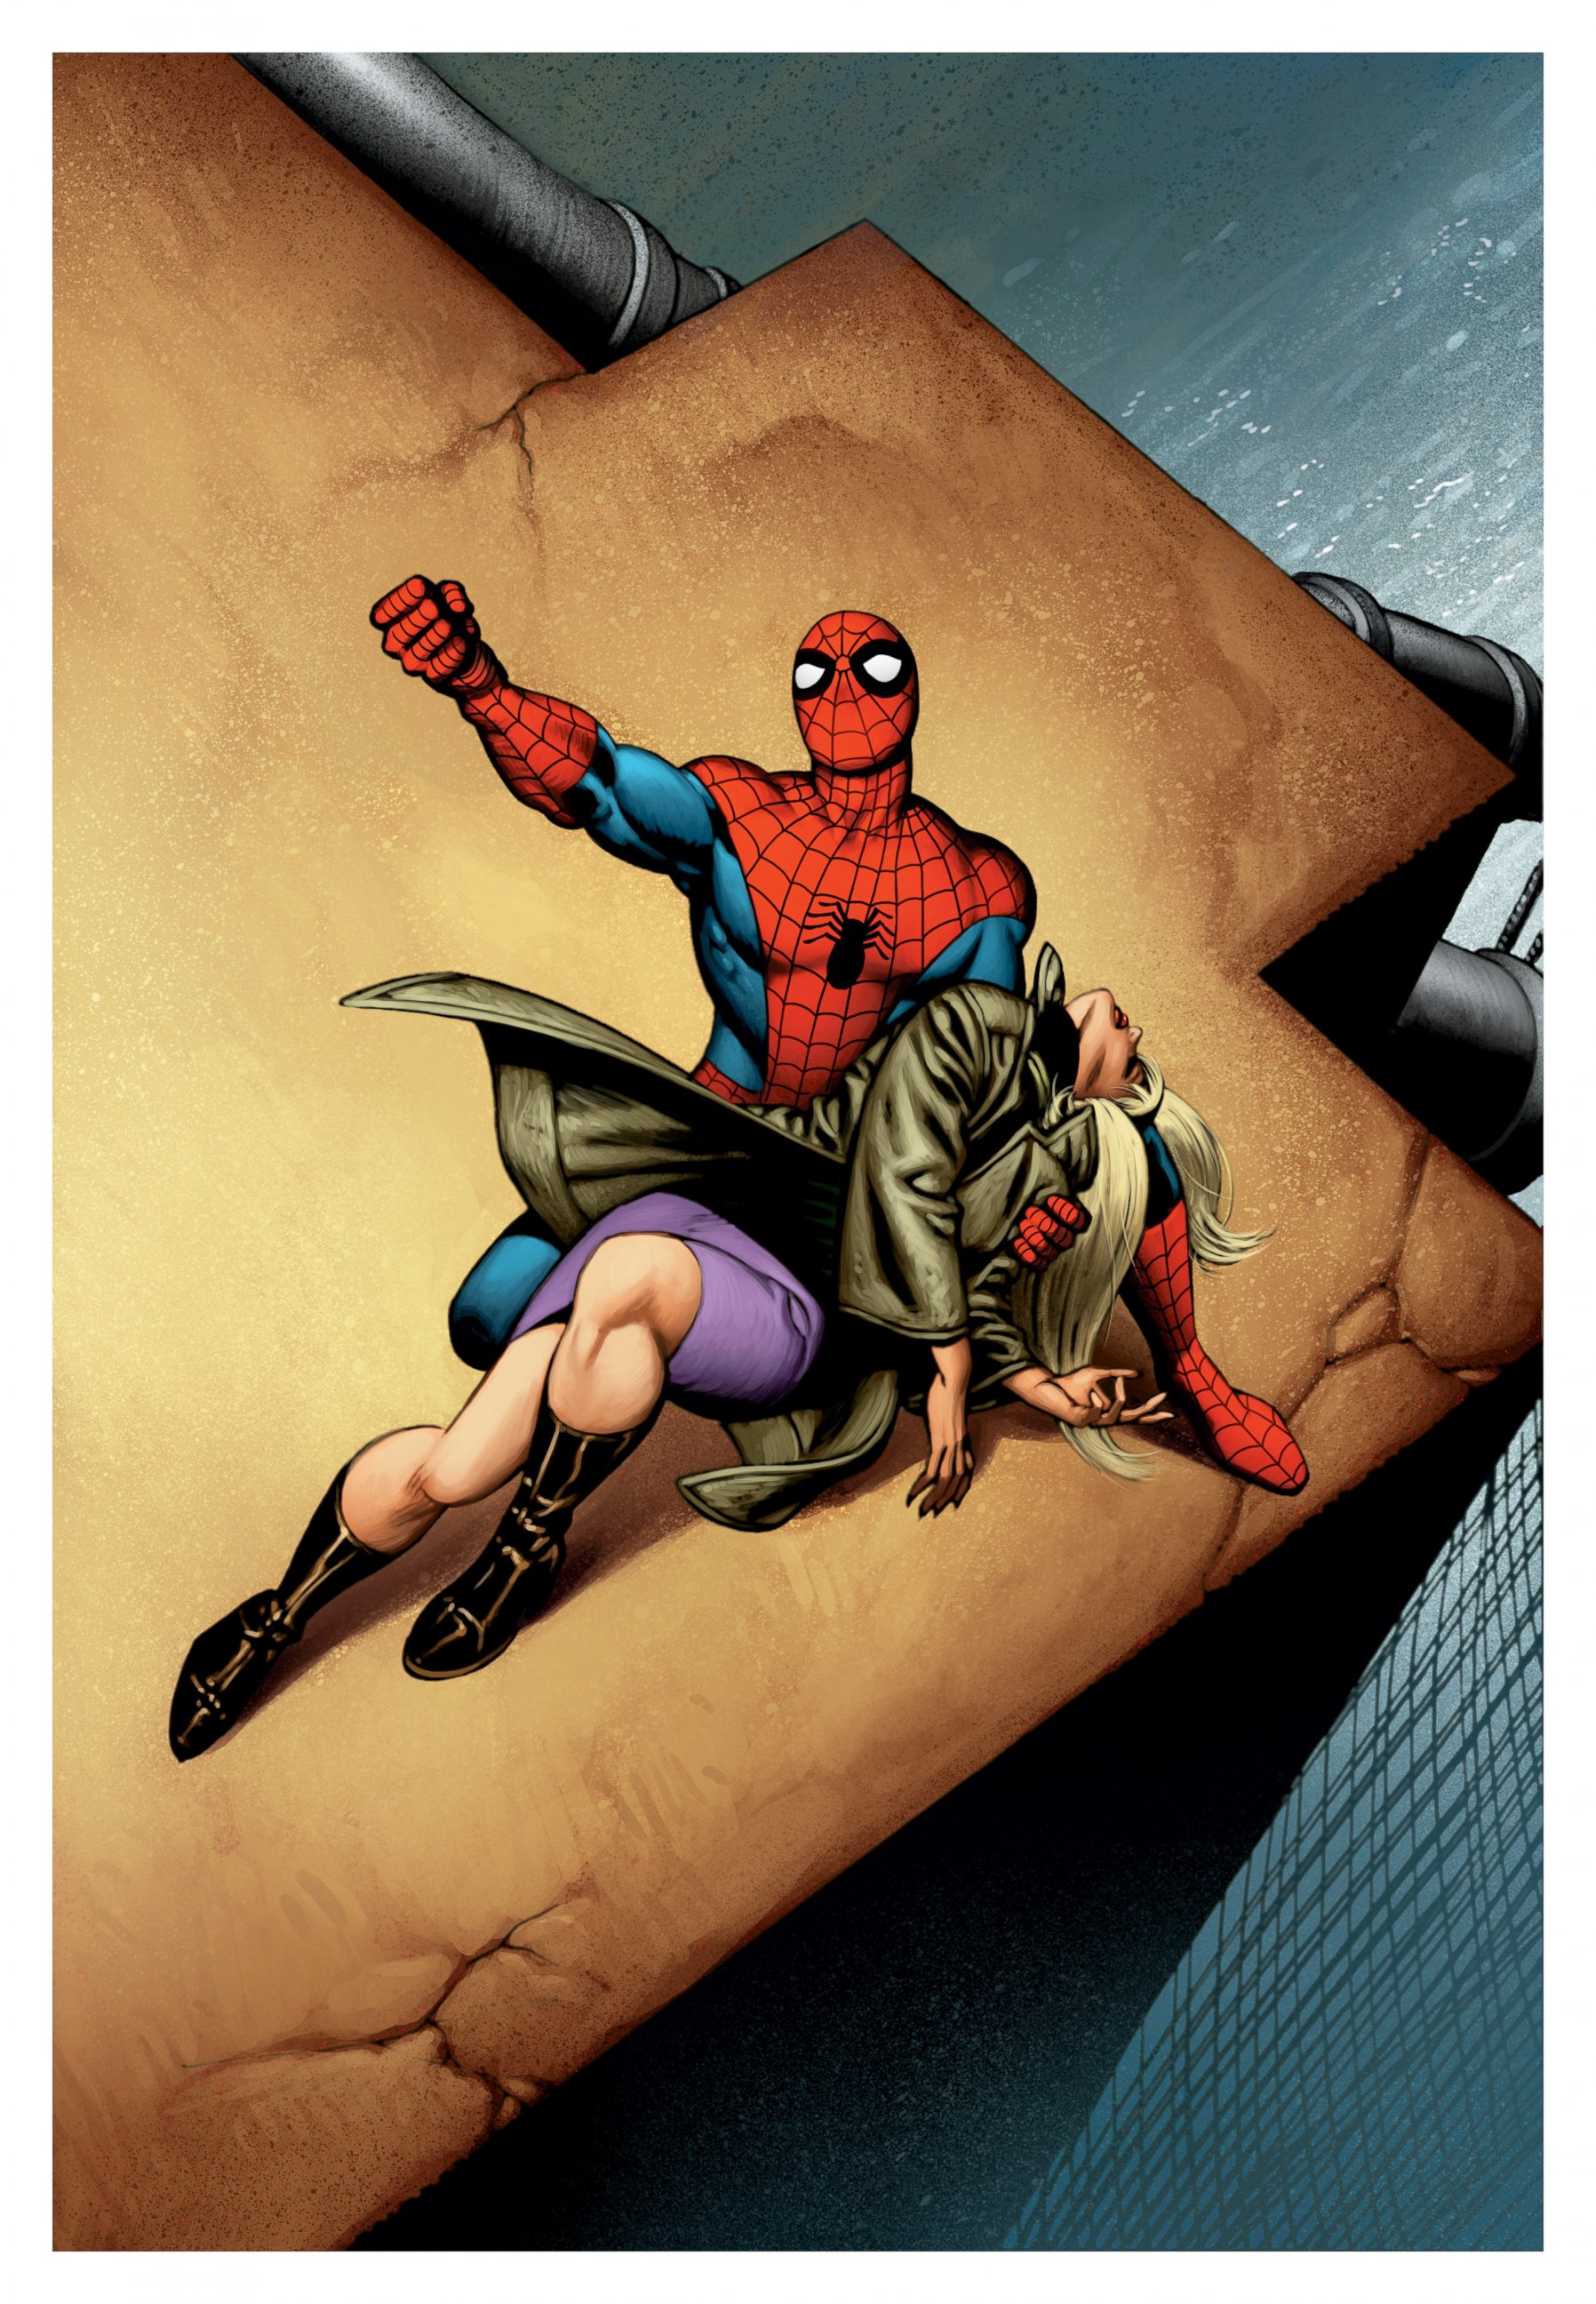 PHOTO: Gwen Stacy was killed by the Green Goblin in the June, 1973 issue of "Amazing Spider-Man."